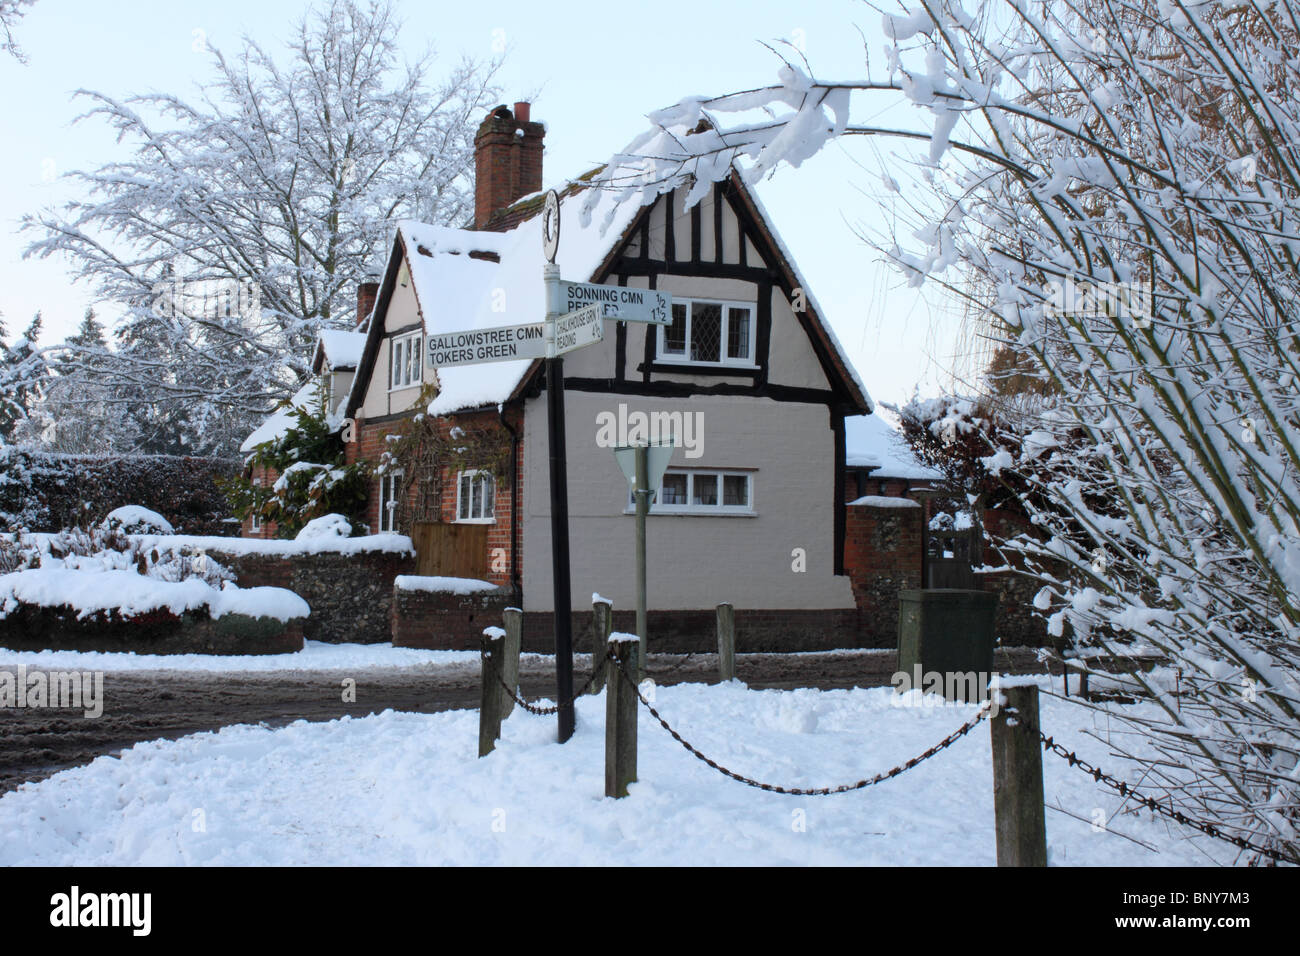 Half timbered House and signpost at Kidmore End in deep snow, Reading, Oxfordshire, England, UK Stock Photo